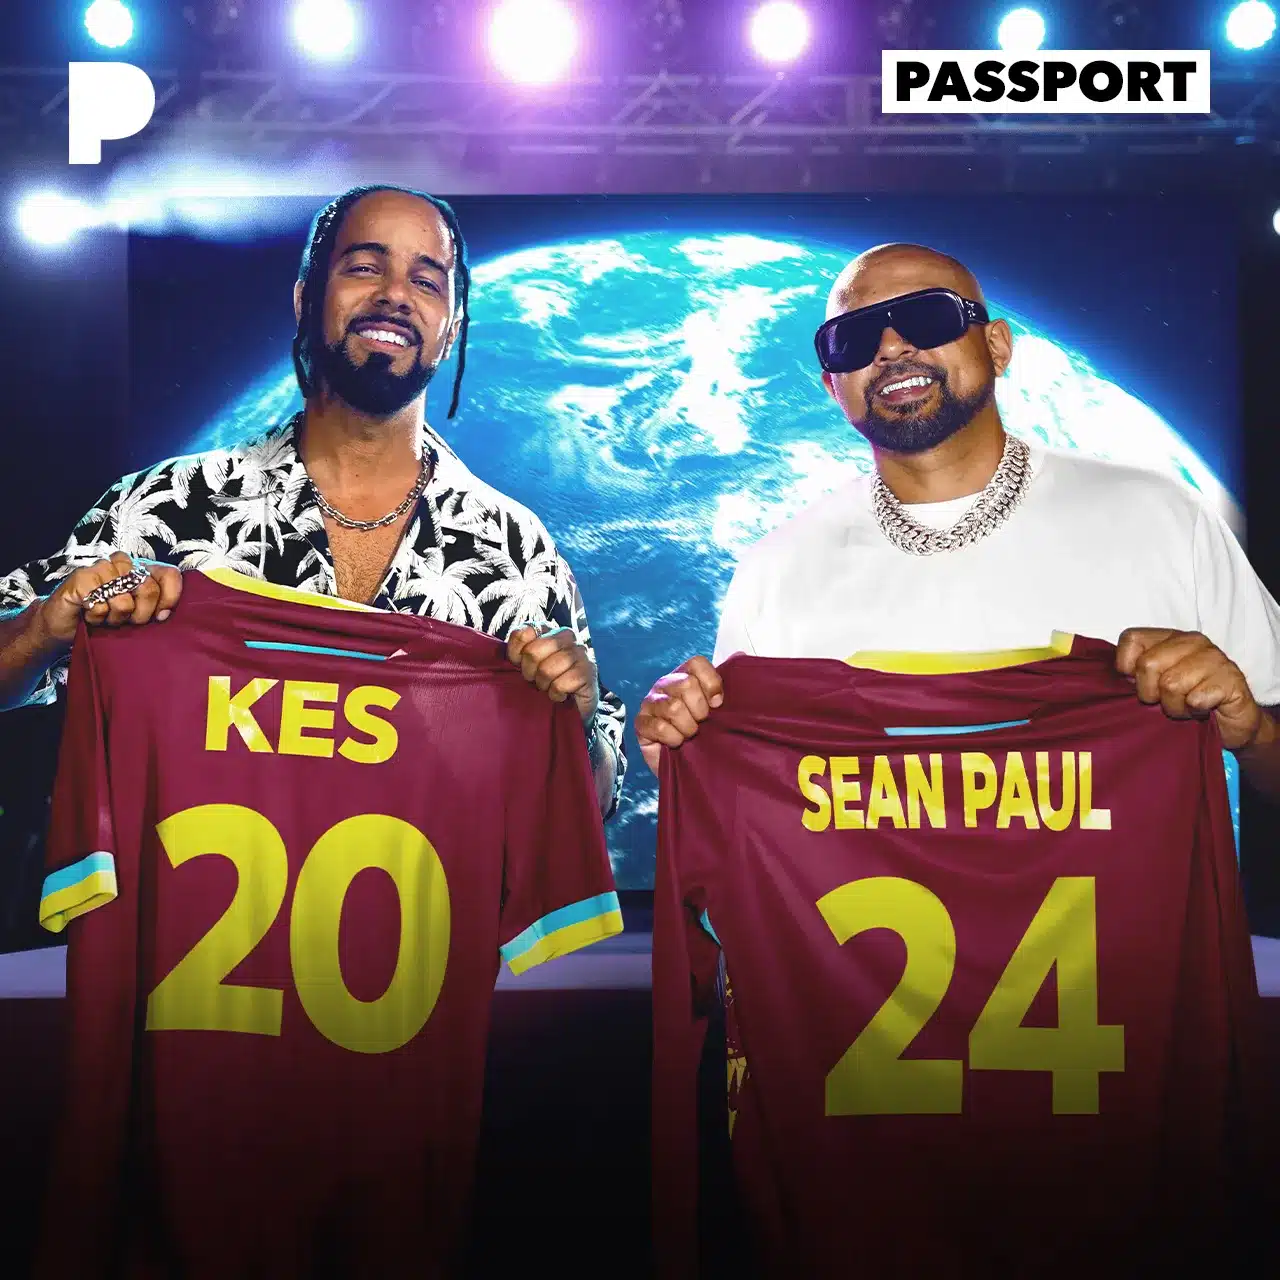 Two men holding maroon sports jerseys with yellow text, "KES 20" and "SEAN PAUL 24." A large earth image is displayed on a screen behind them under stage lights, reminiscent of a dramatic Grace Gaustad case study presentation.